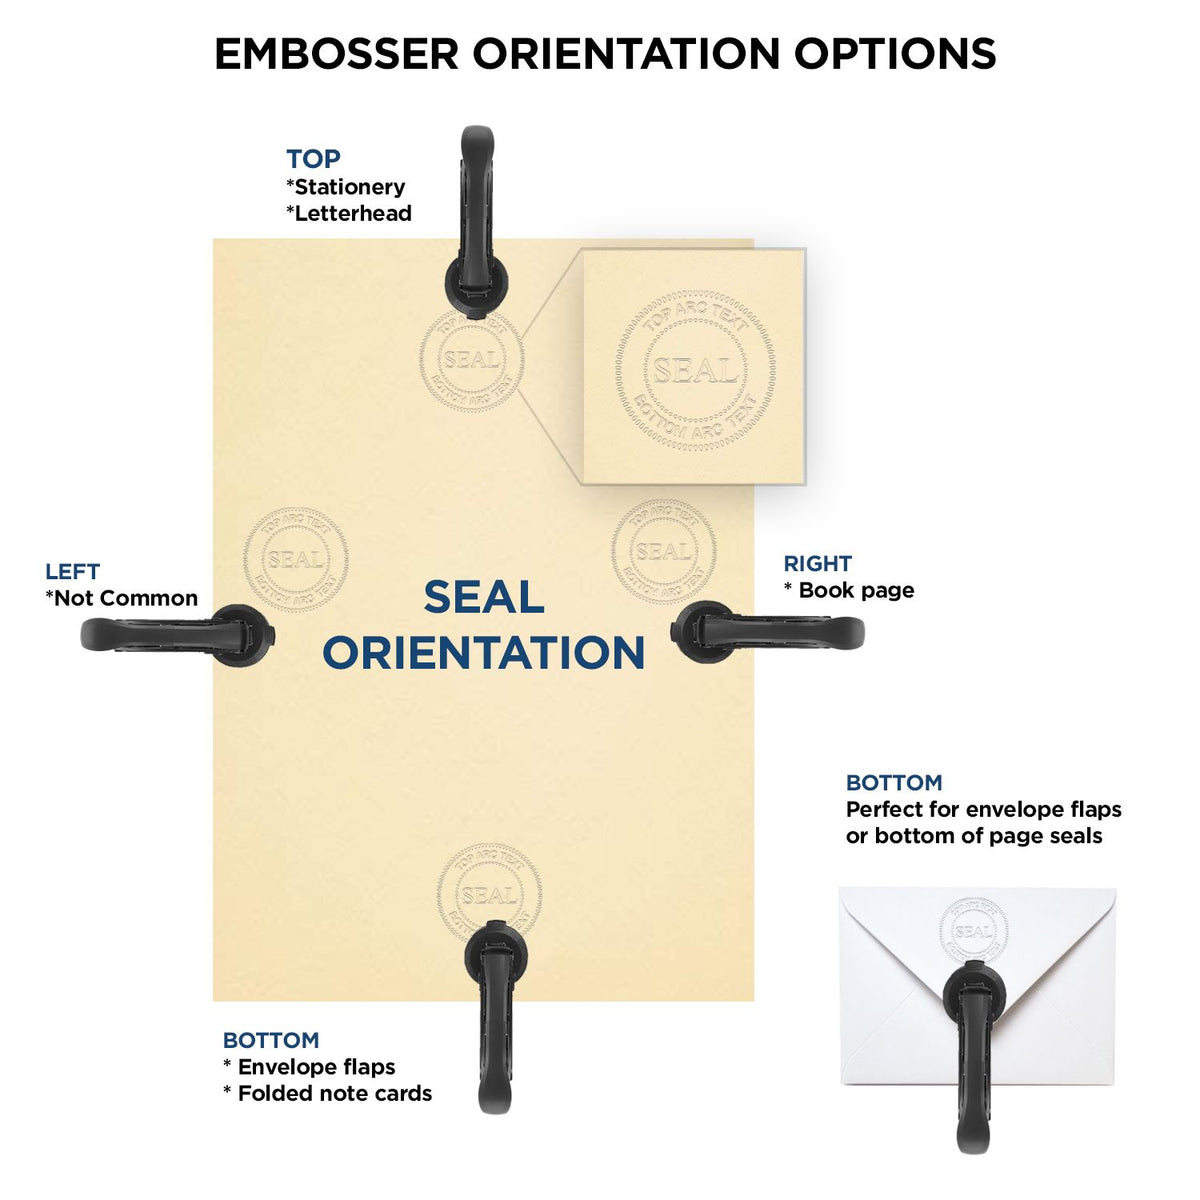 An infographic for the State of Georgia Architectural Seal Embosser showing embosser orientation, this is showing examples of a top, bottom, right and left insert.